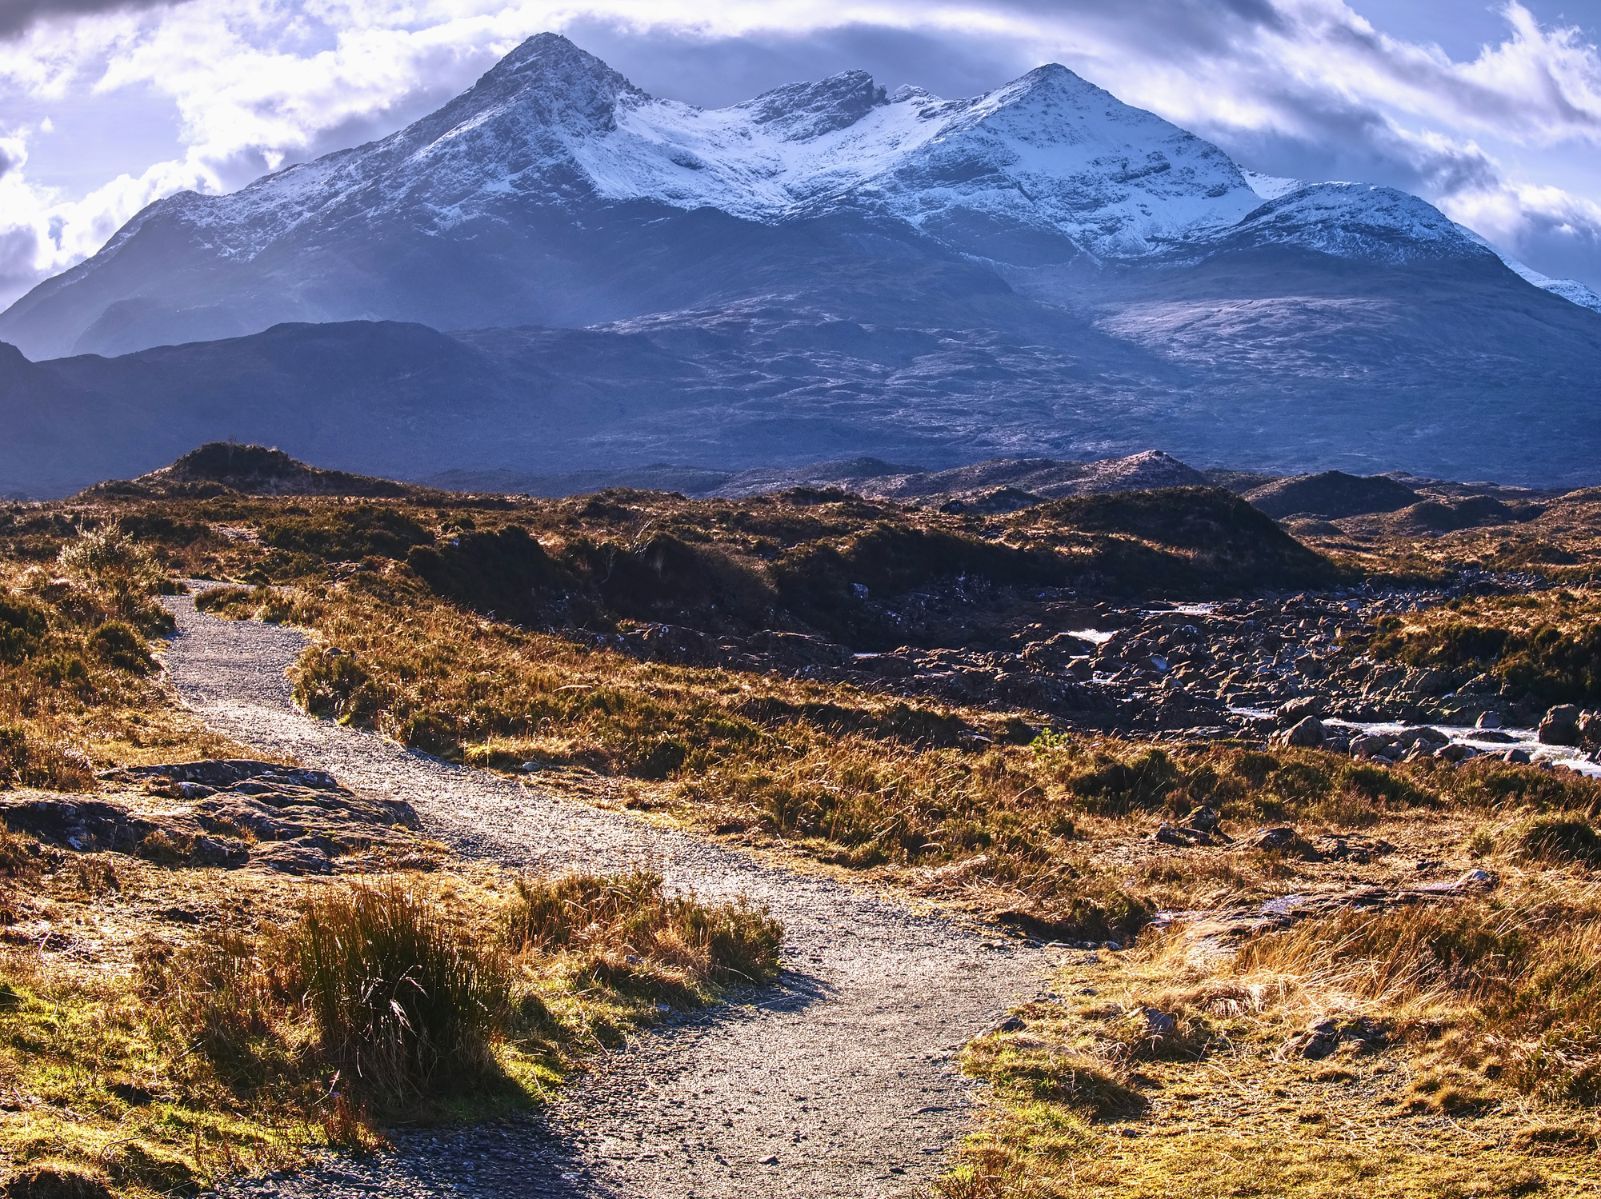 The River Sligachan and the clouds gathering above Sgurr nan Gillean, in the Cuillin Mountains, behind. Photo: Getty